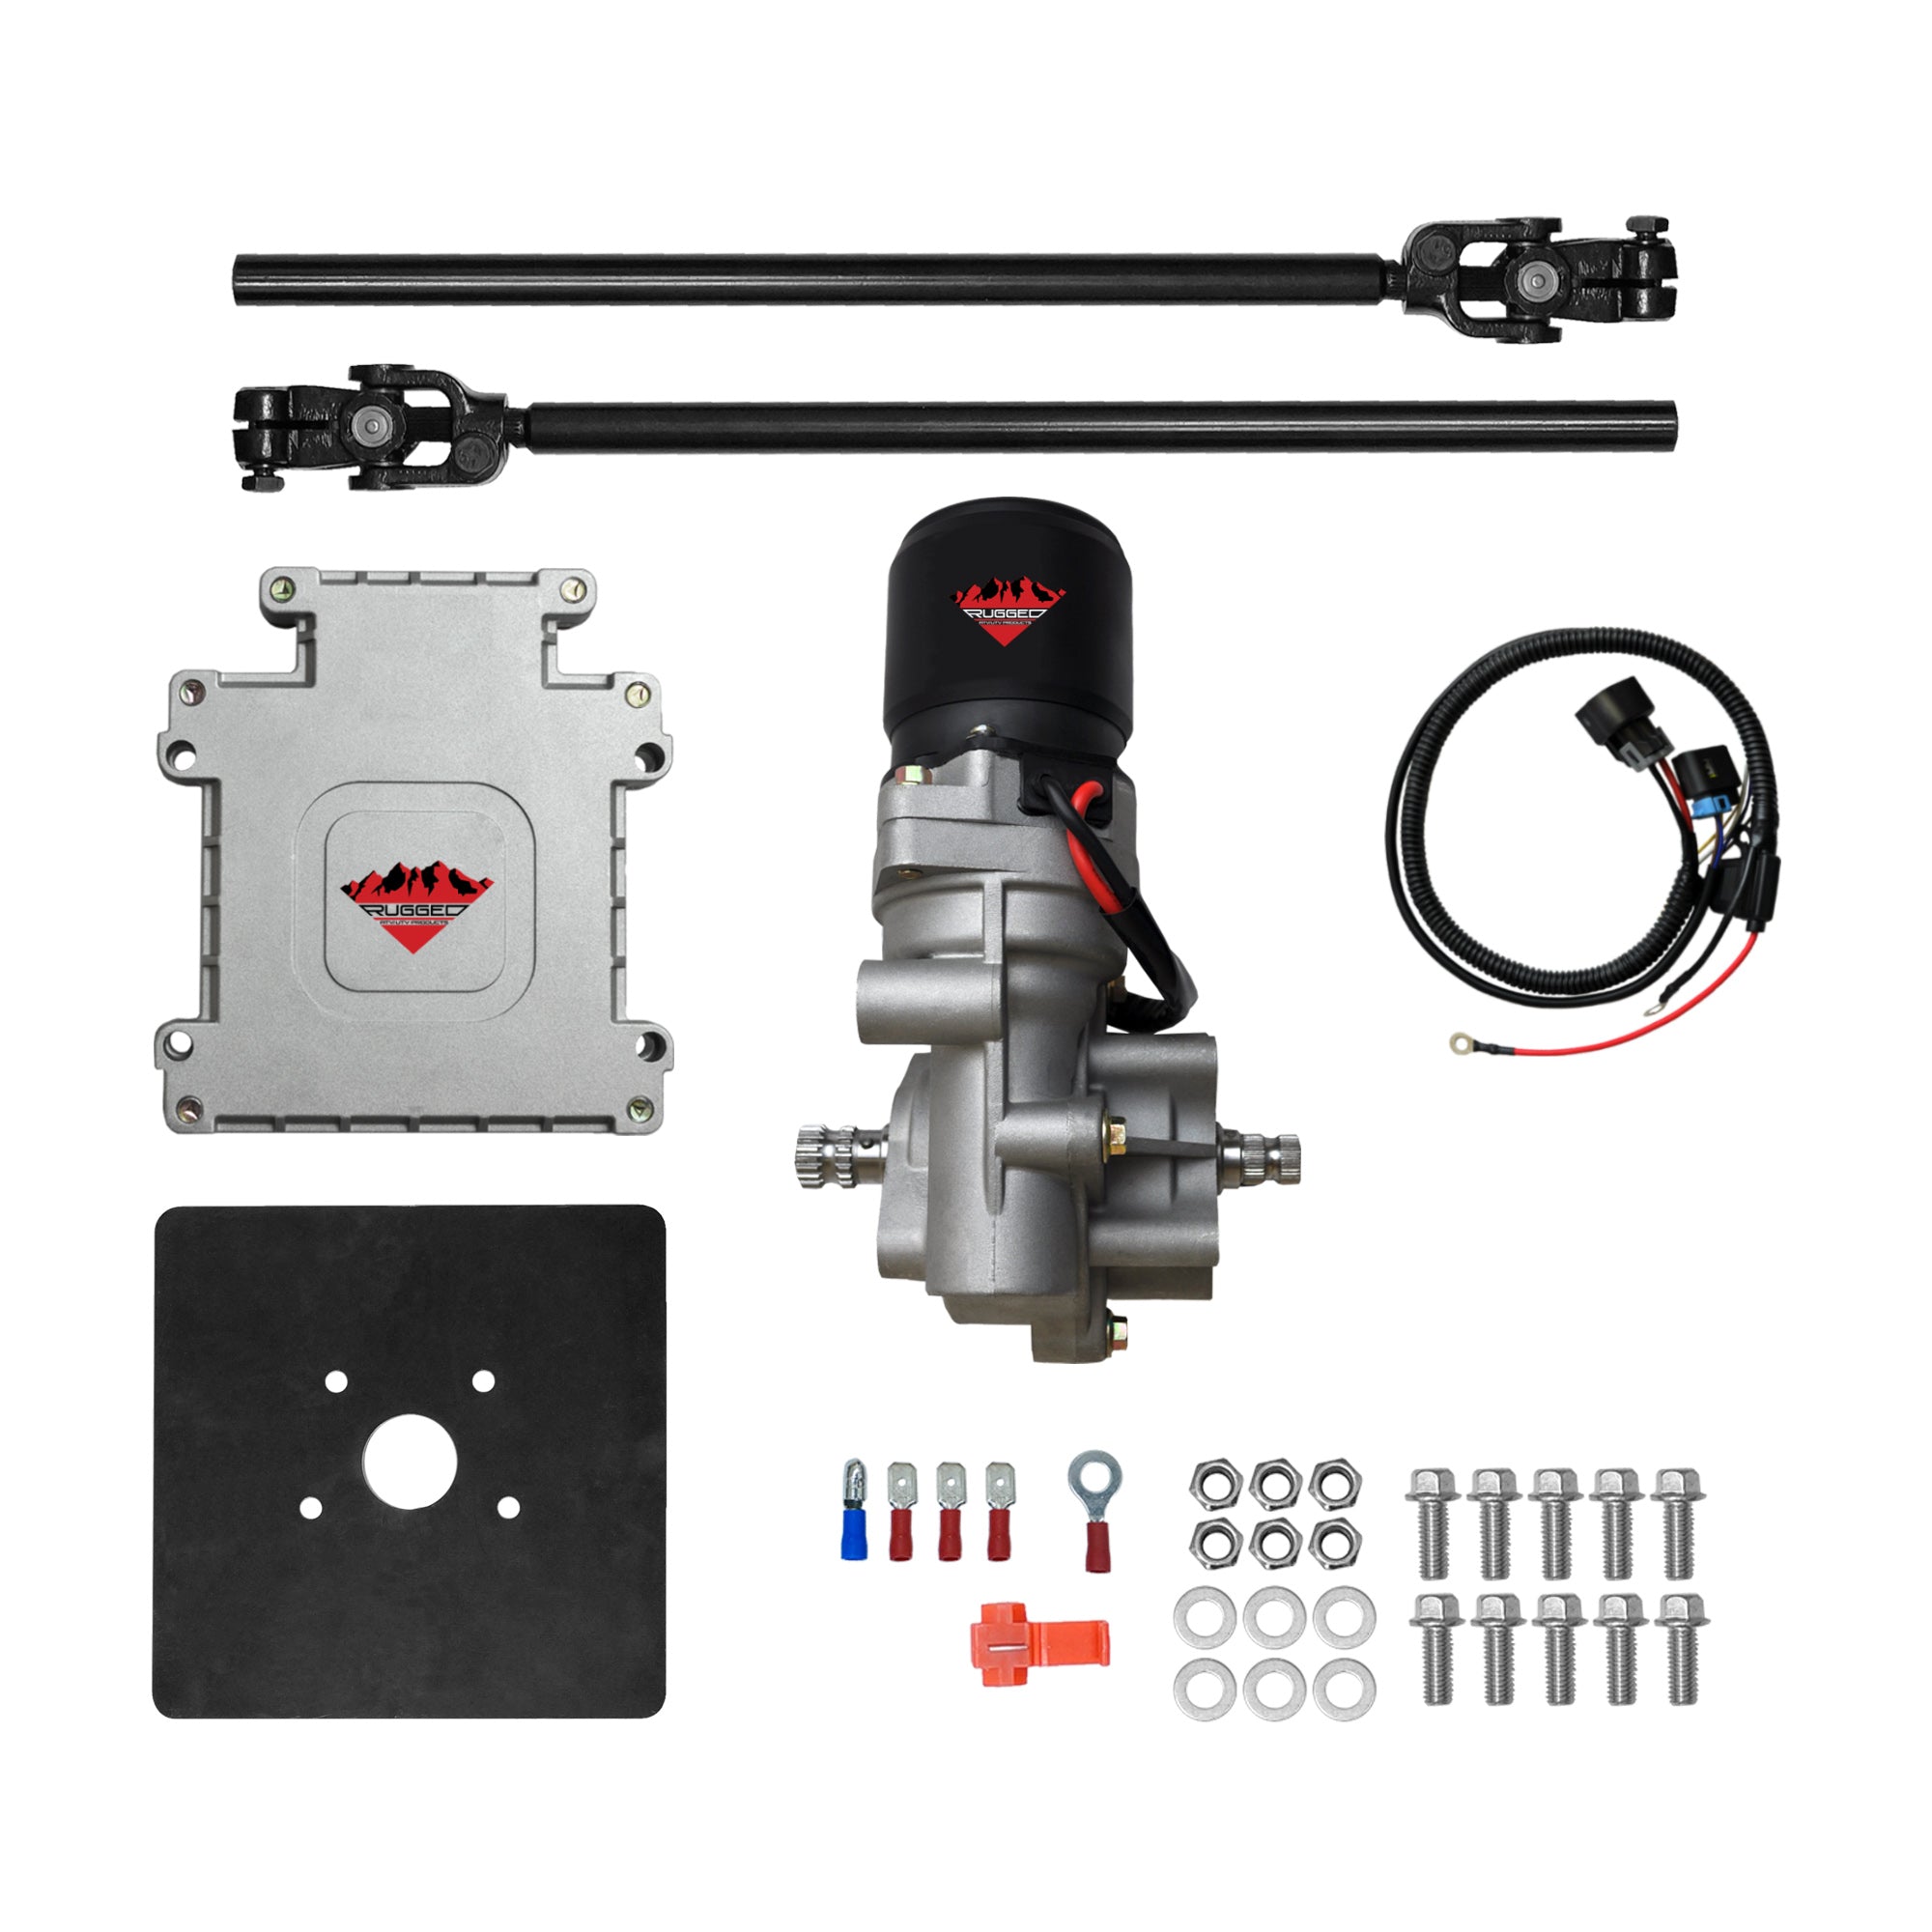 Universal Application Rugged Electric Power Steering Kit (400W)